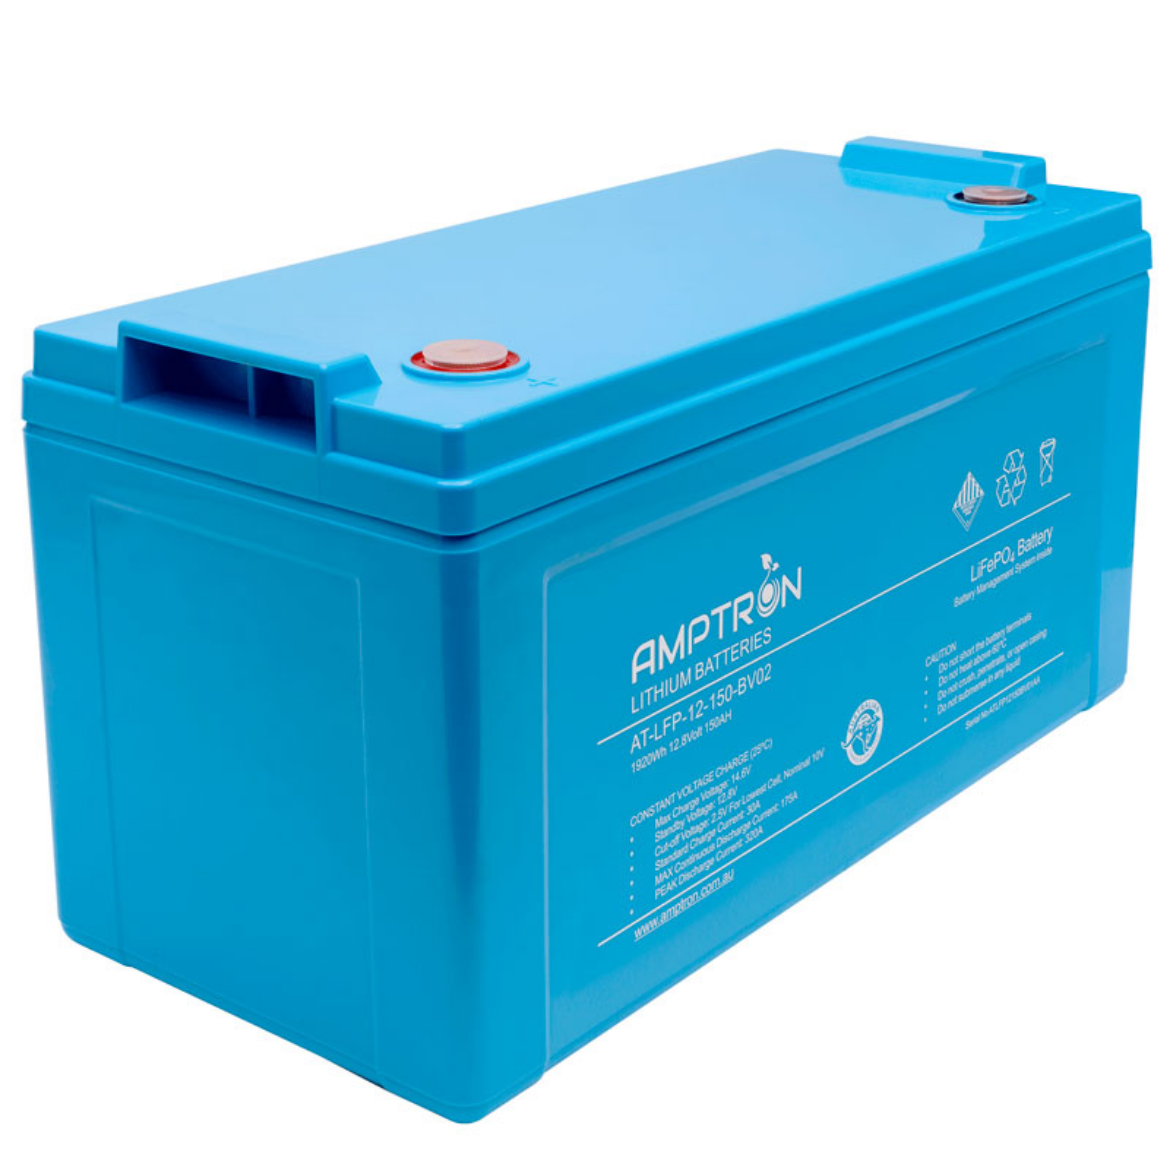 Picture of 12VOLT 150AH / 175A BMS / 1920WH CAPACITY AMPTRON LIFEPO4 BATTERY - IP65 RATING